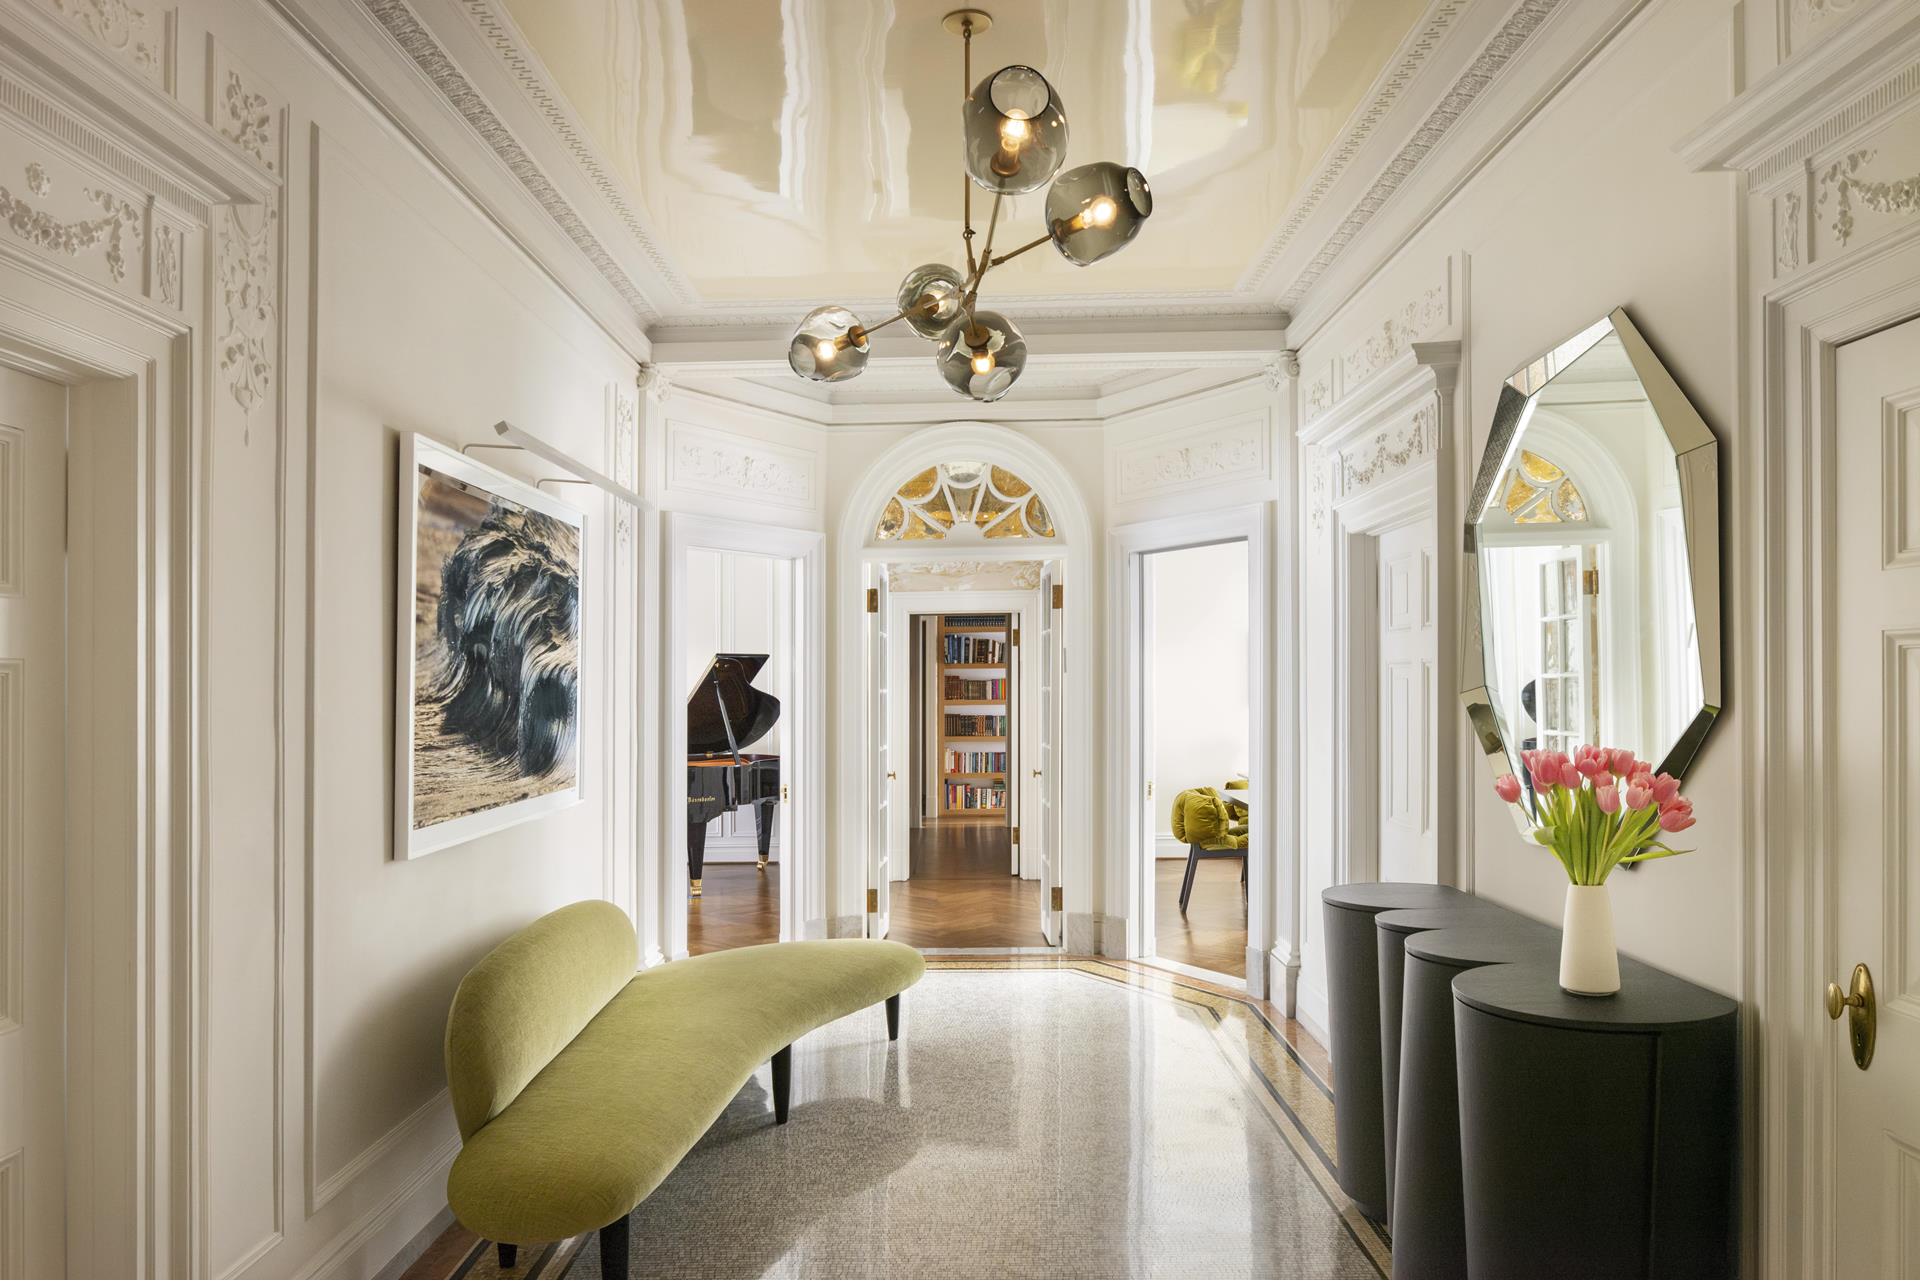 390 West End Avenue 2Abc, Upper West Side, Upper West Side, NYC - 9 Bedrooms  
8.5 Bathrooms  
19 Rooms - 